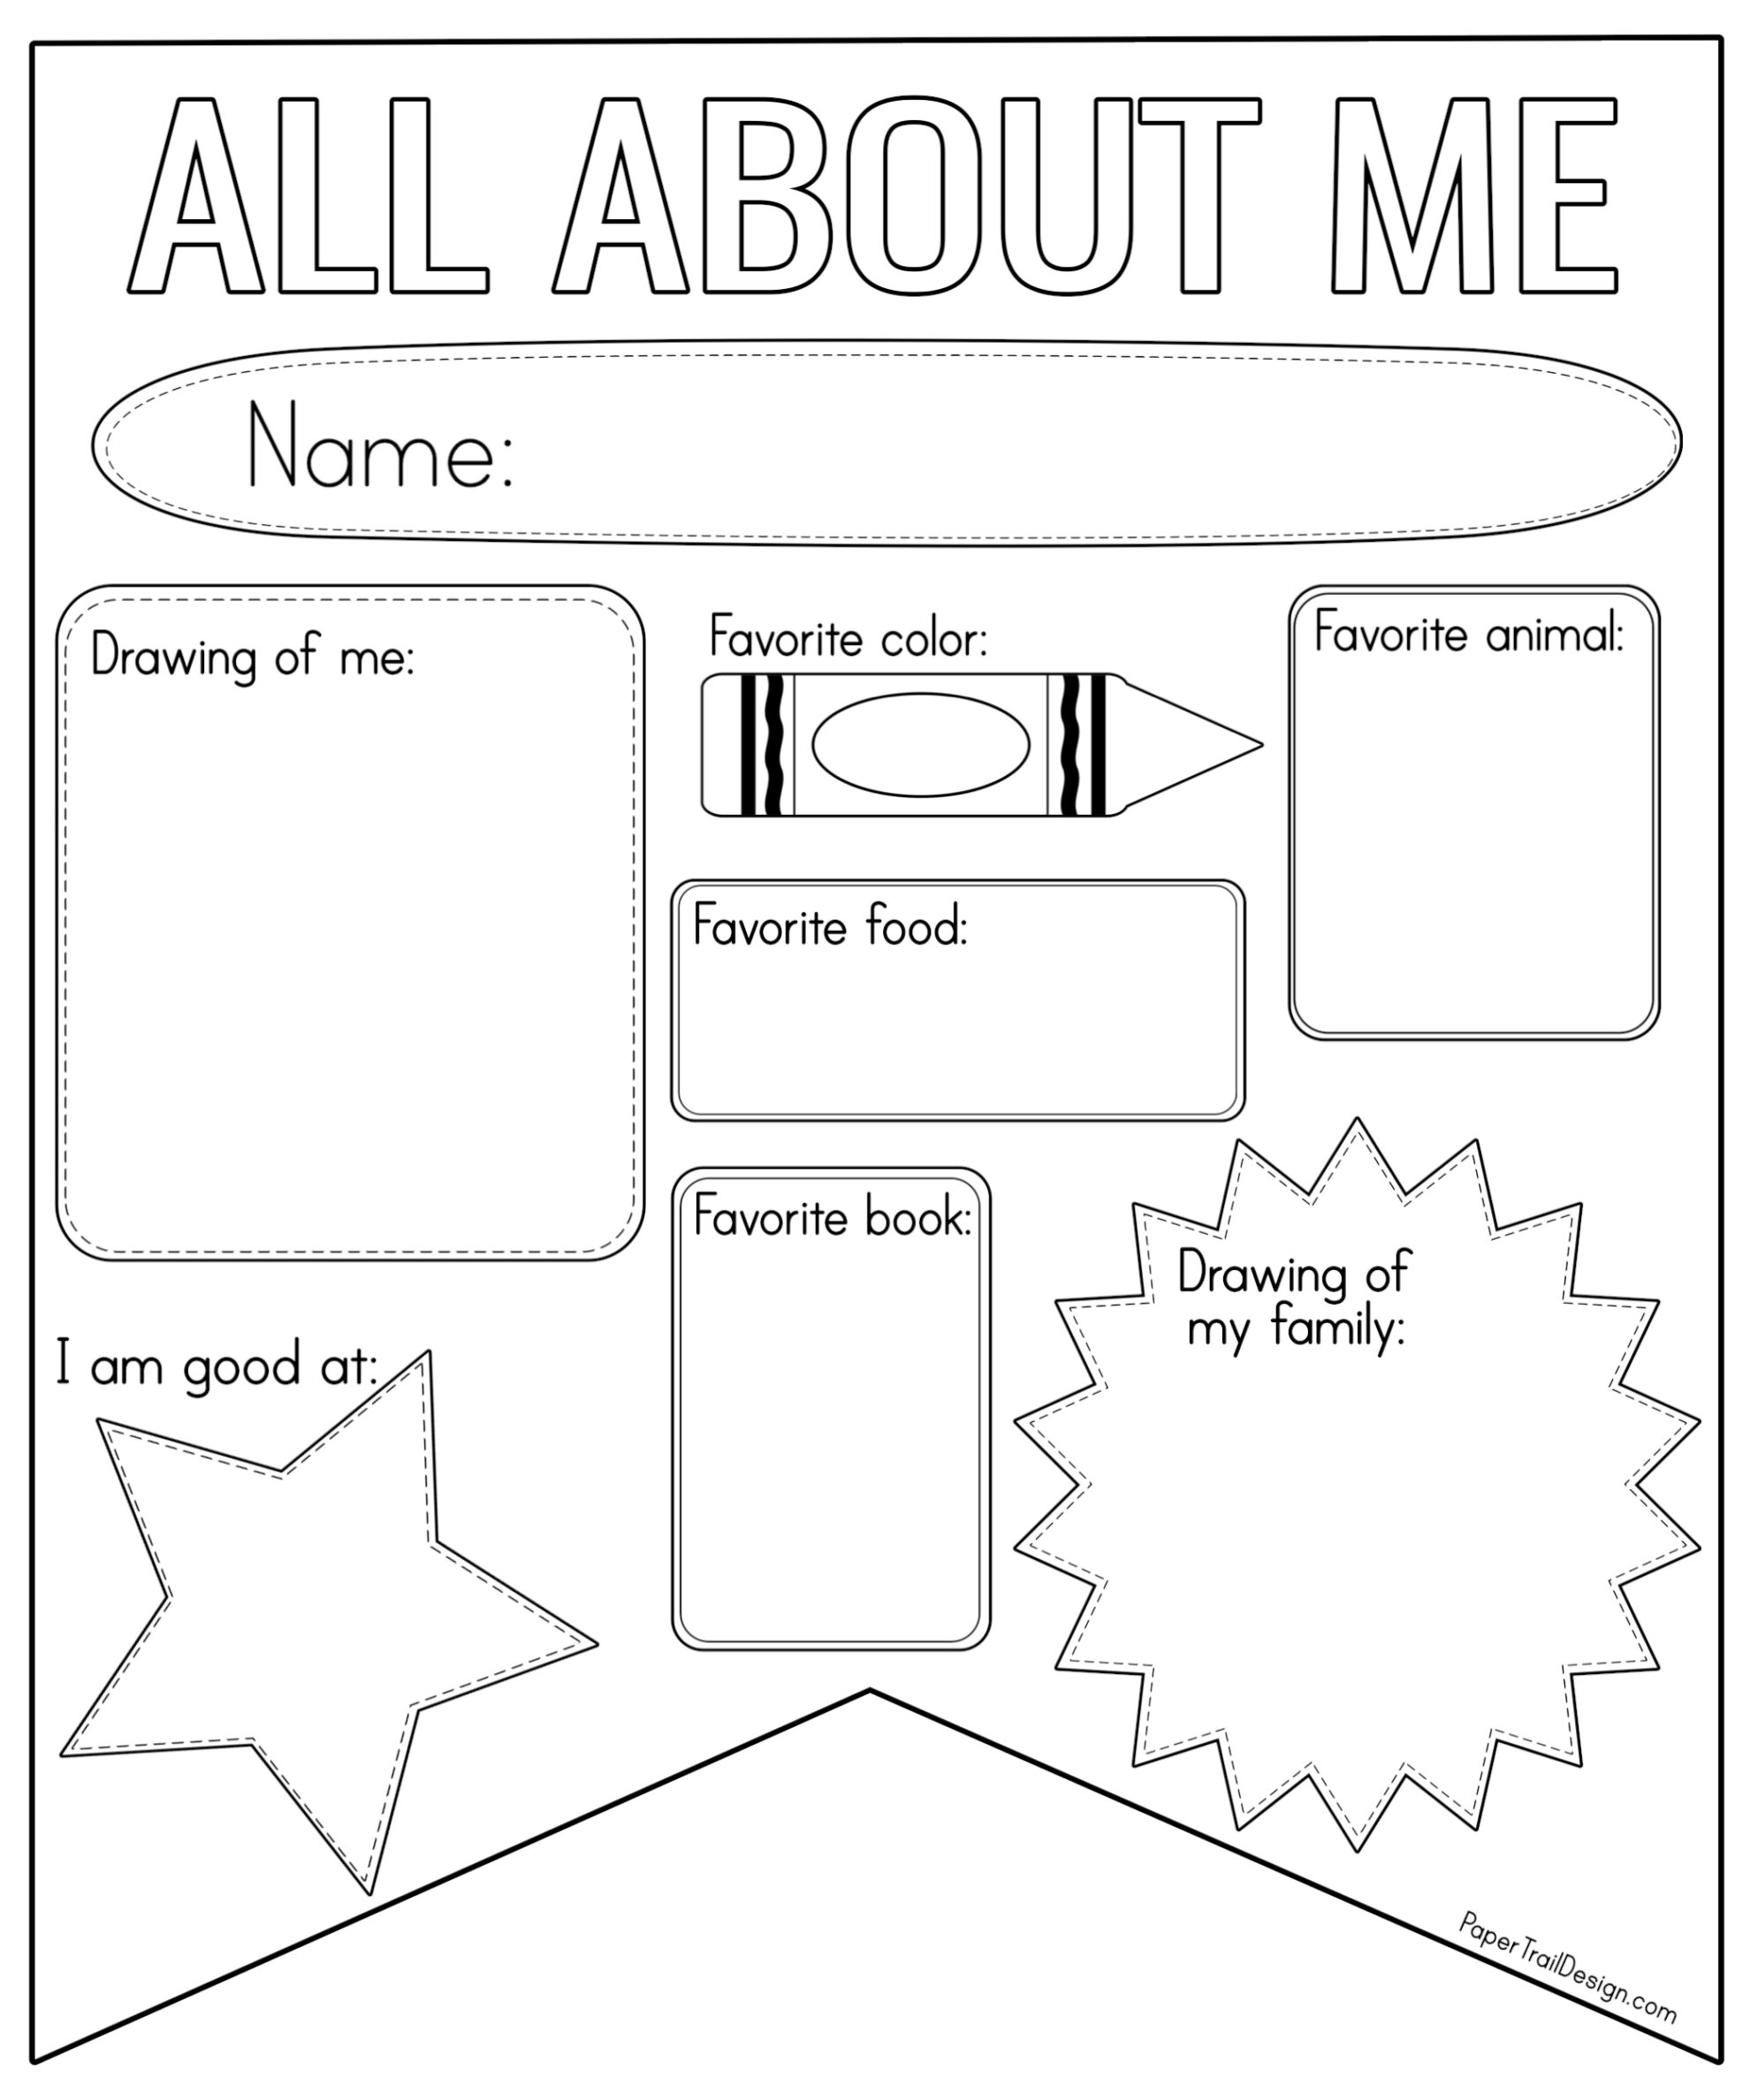 all-about-me-template-free-printable-get-what-you-need-for-free